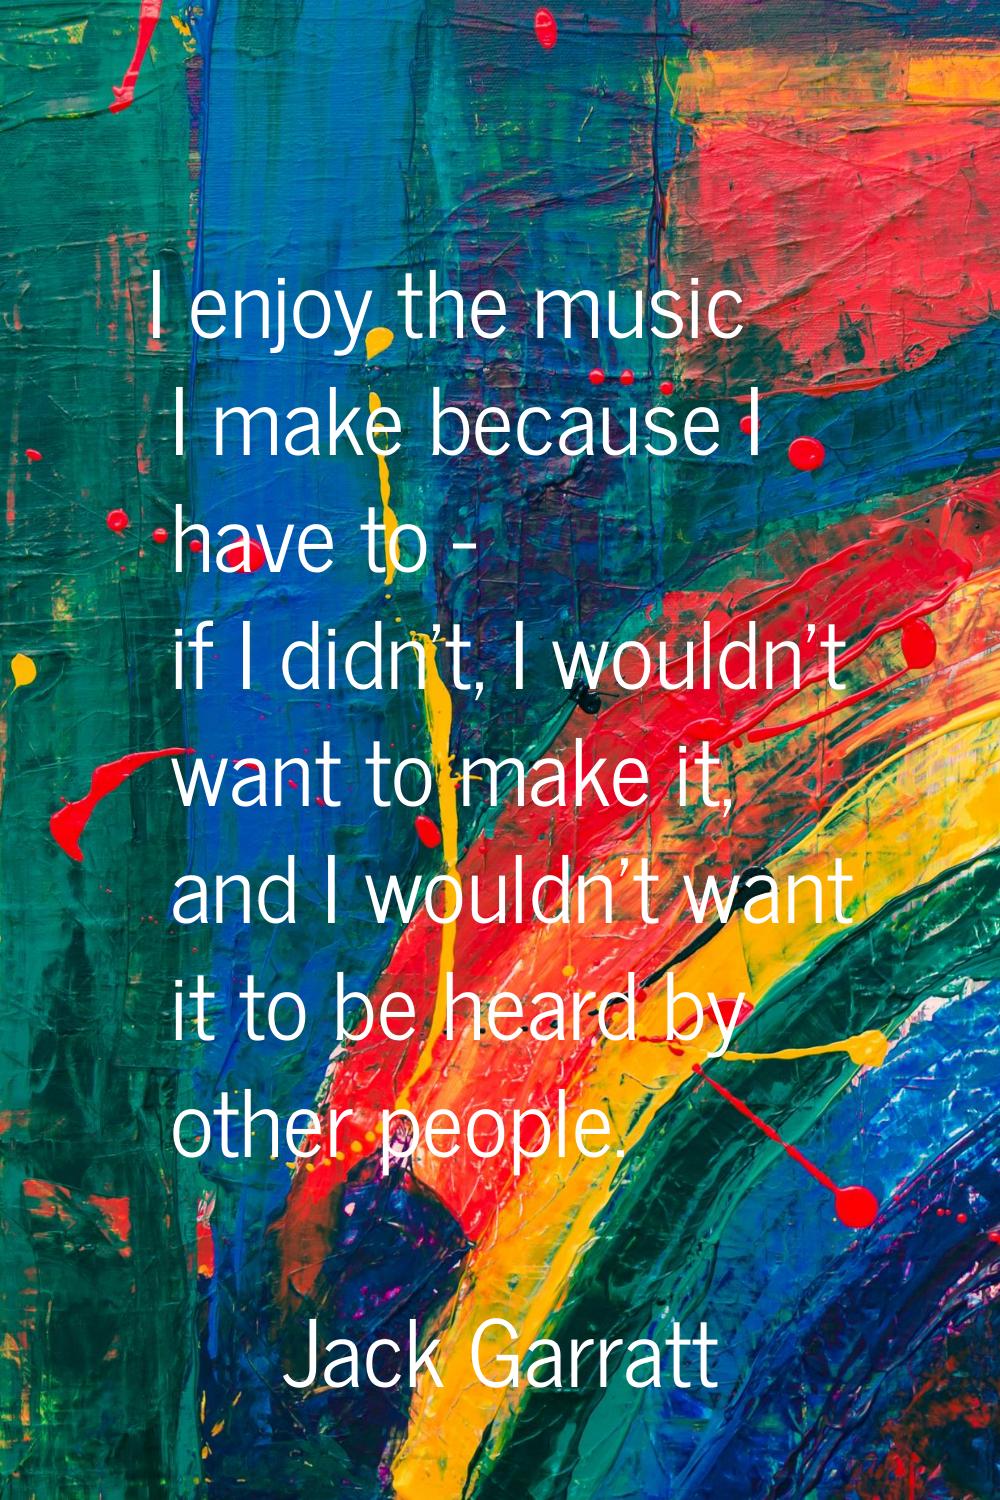 I enjoy the music I make because I have to - if I didn't, I wouldn't want to make it, and I wouldn'